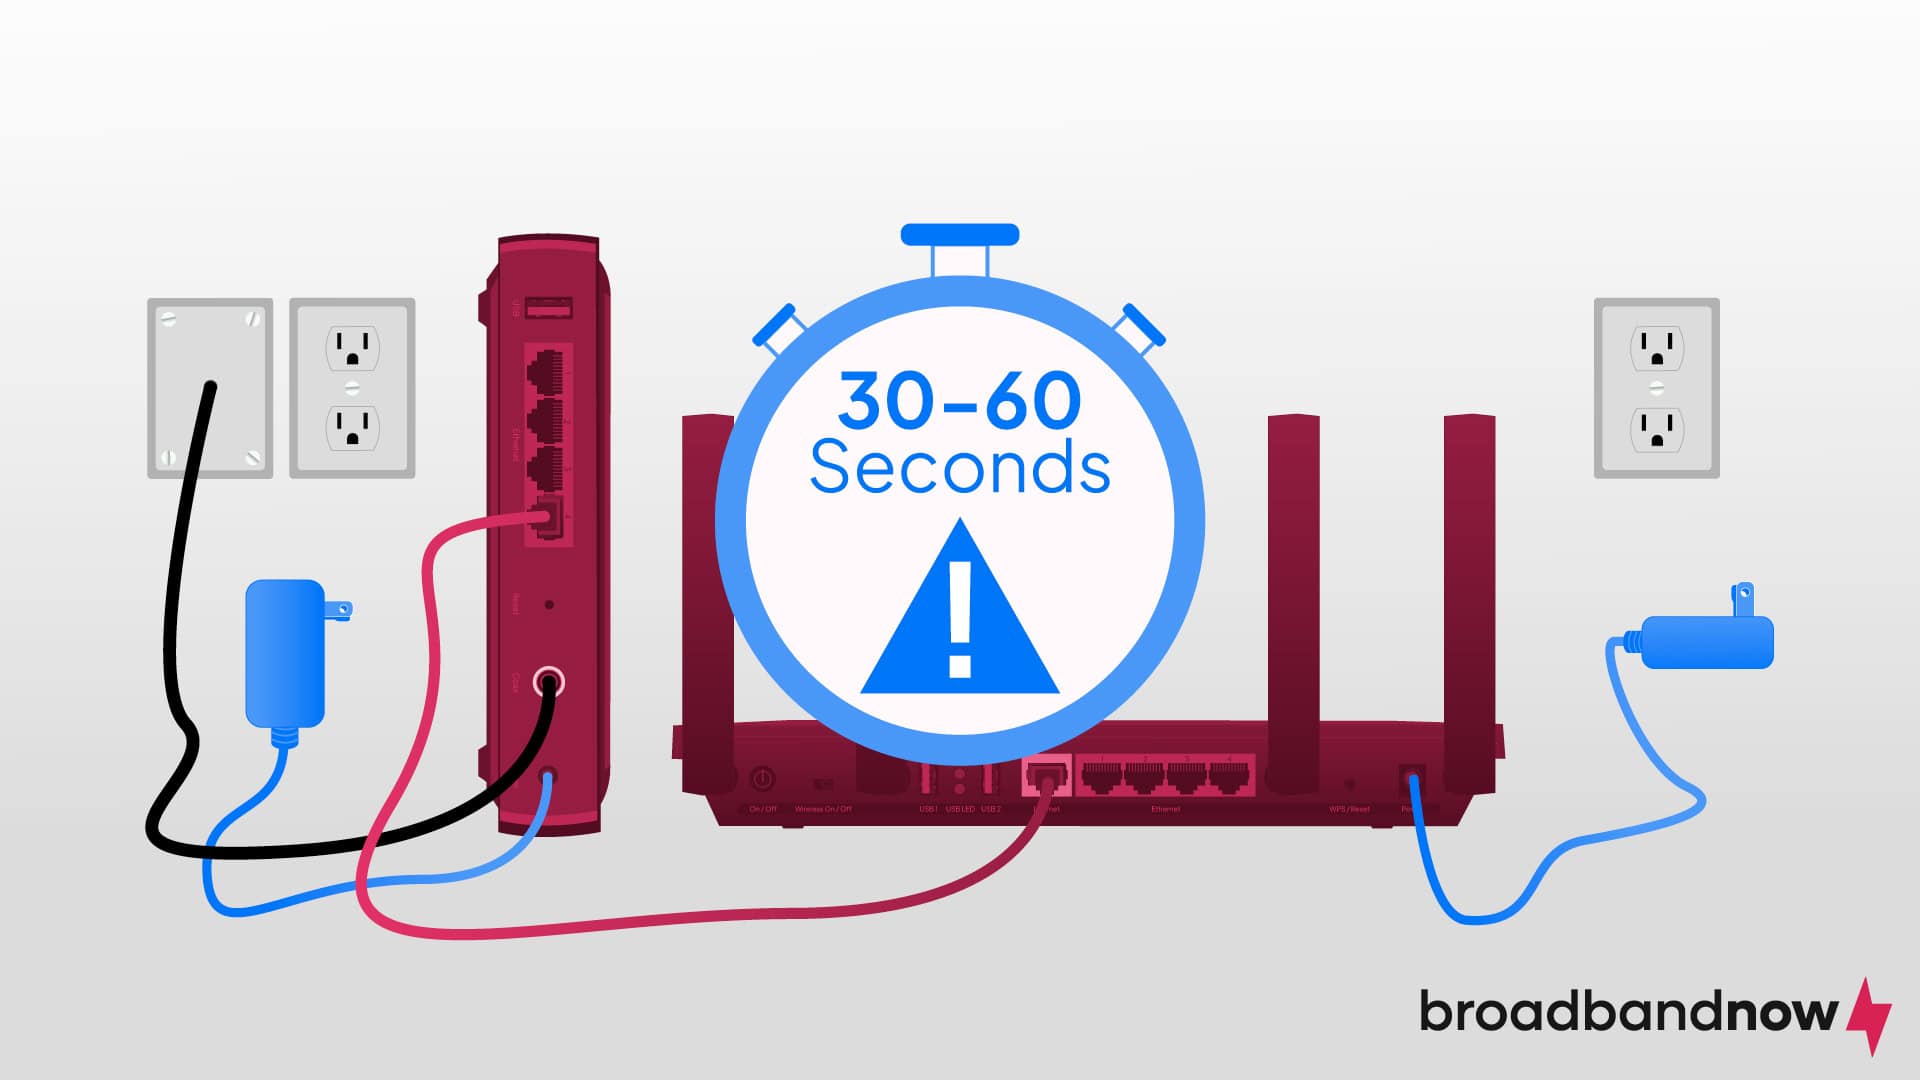 Graphic of a router and modem connected to wall outlets and a timer that displays 30-60 seconds.